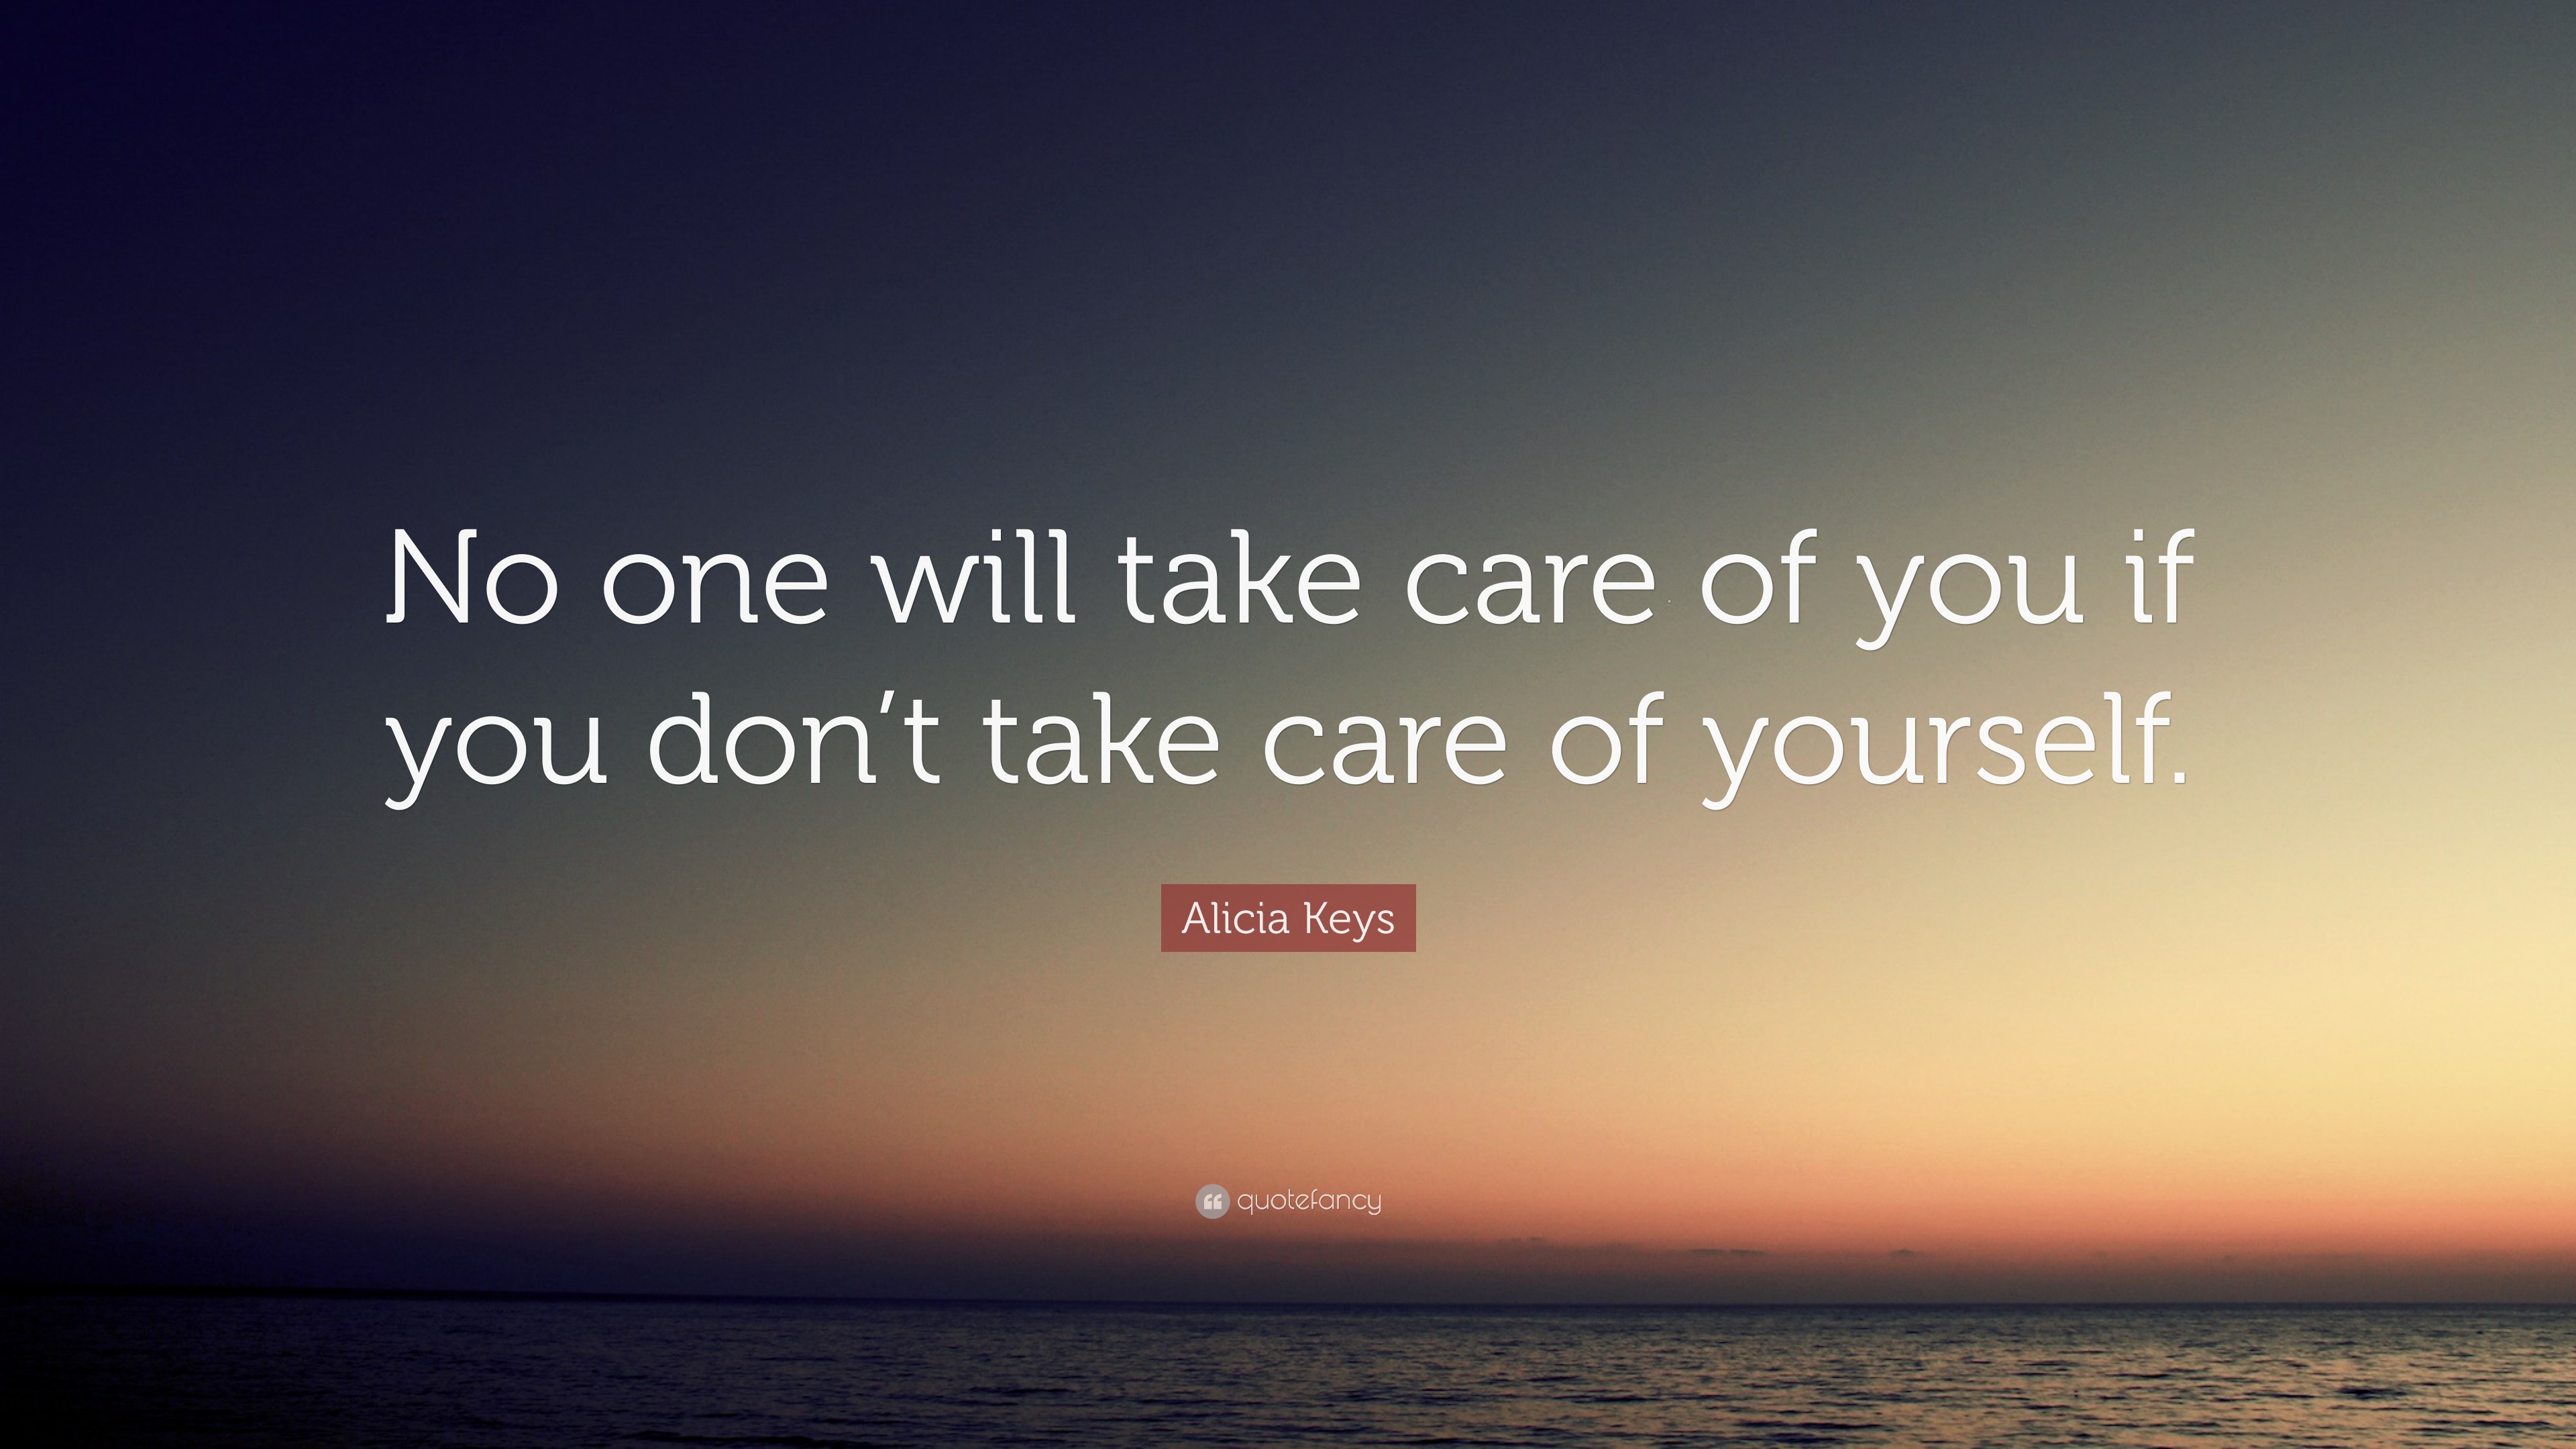 Alicia Keys Quote “No one will take care of you if you don’t take care